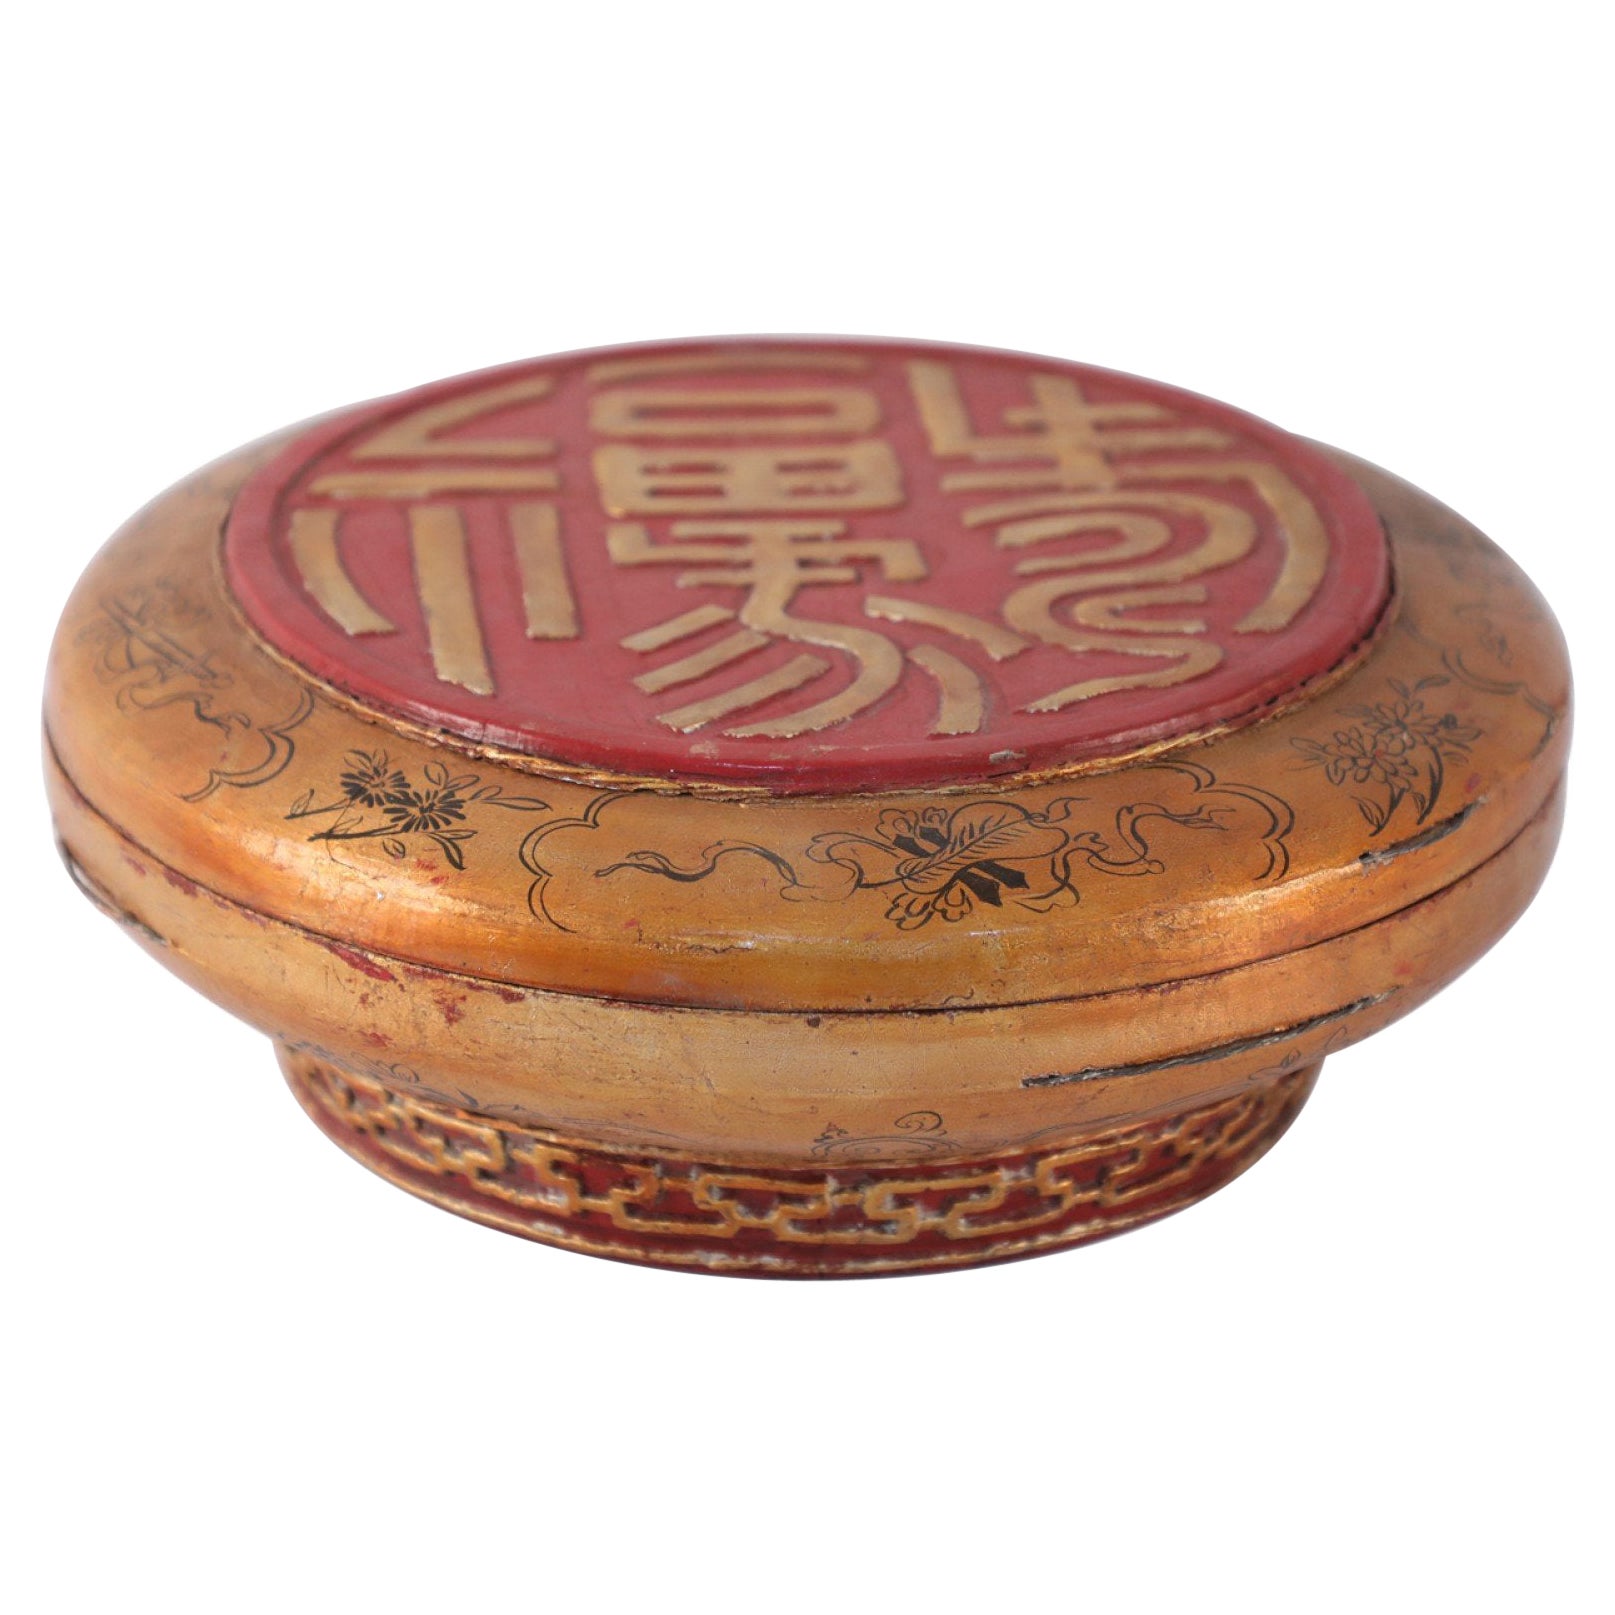 Antique Chinese Carved Wooden Gold and Red Decorative Box